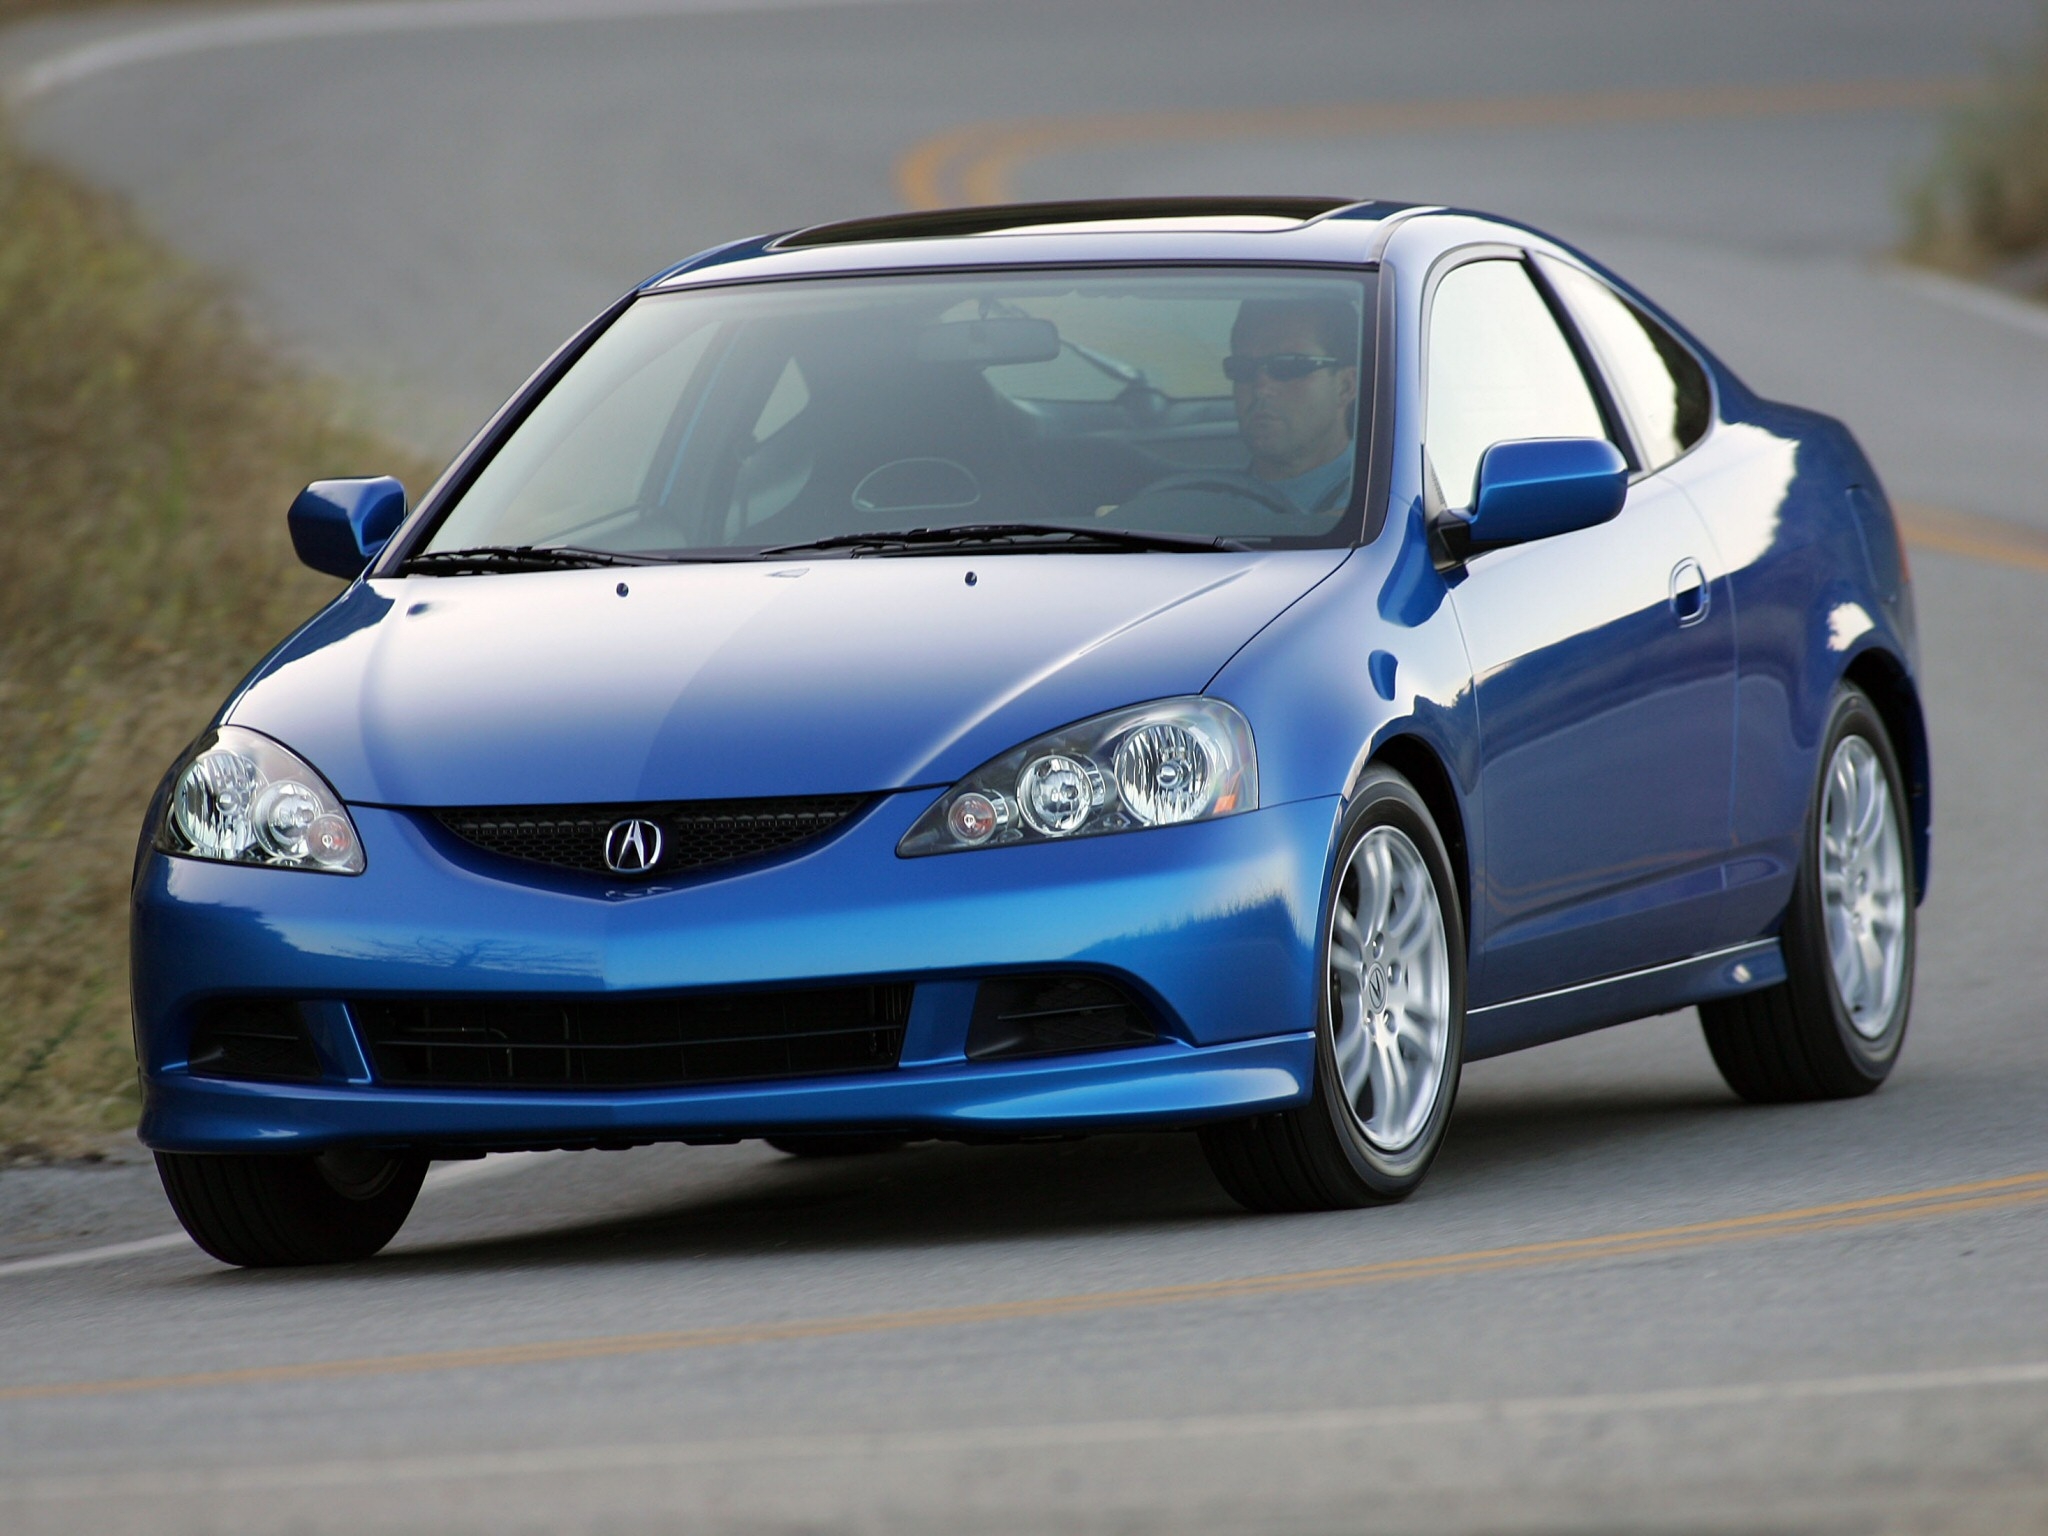 Desktop FHD auto, acura, cars, blue, road, front view, style, rsx, 2005, akura